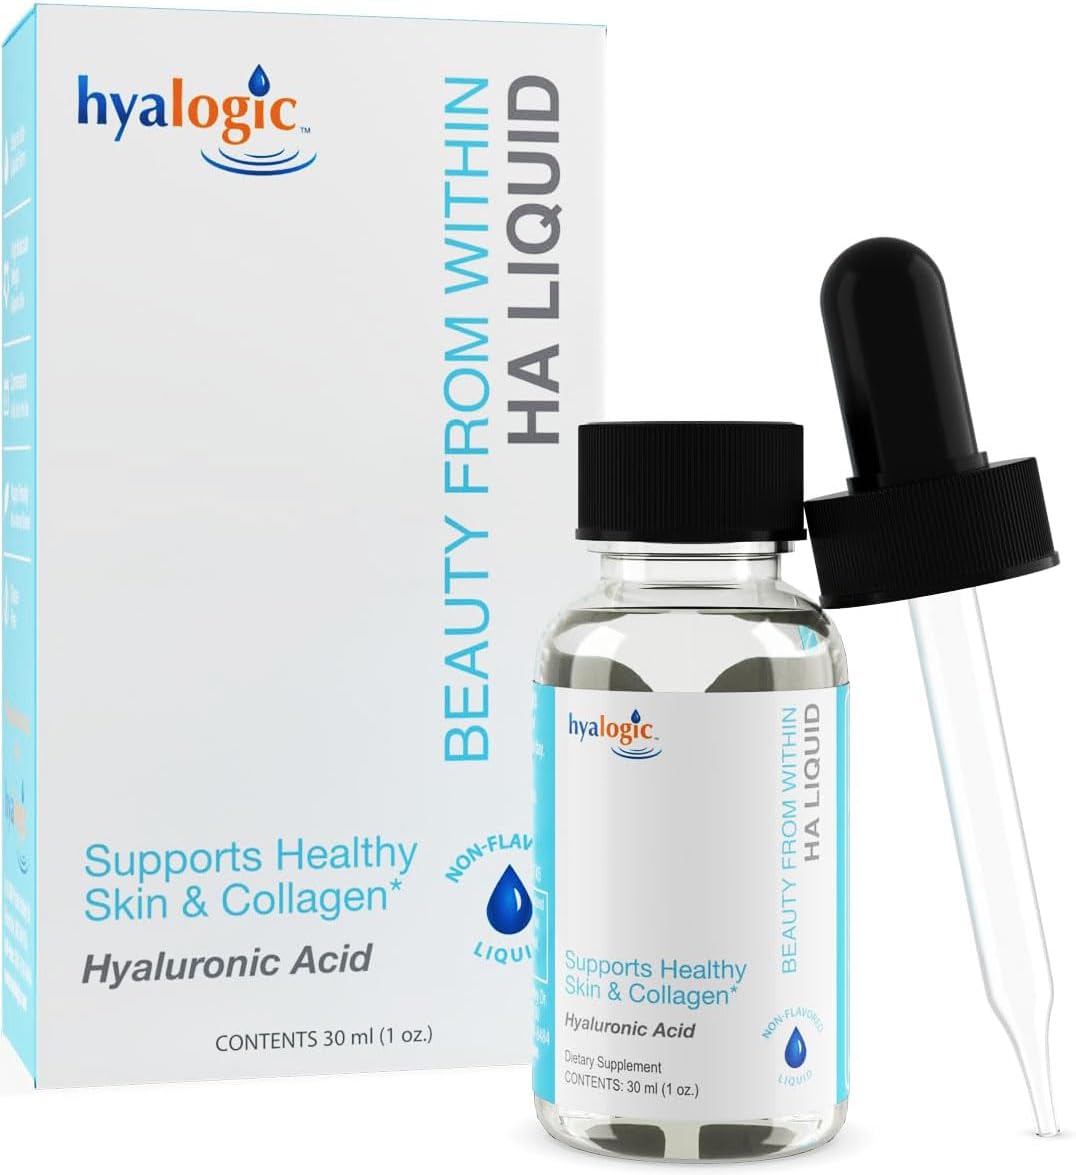 Hyalogic Vegan Friendly Hyaluronic Acid Liquid Supplement- Beauty from Within: Daily Skincare 30 ml. HA Dietary Supplement